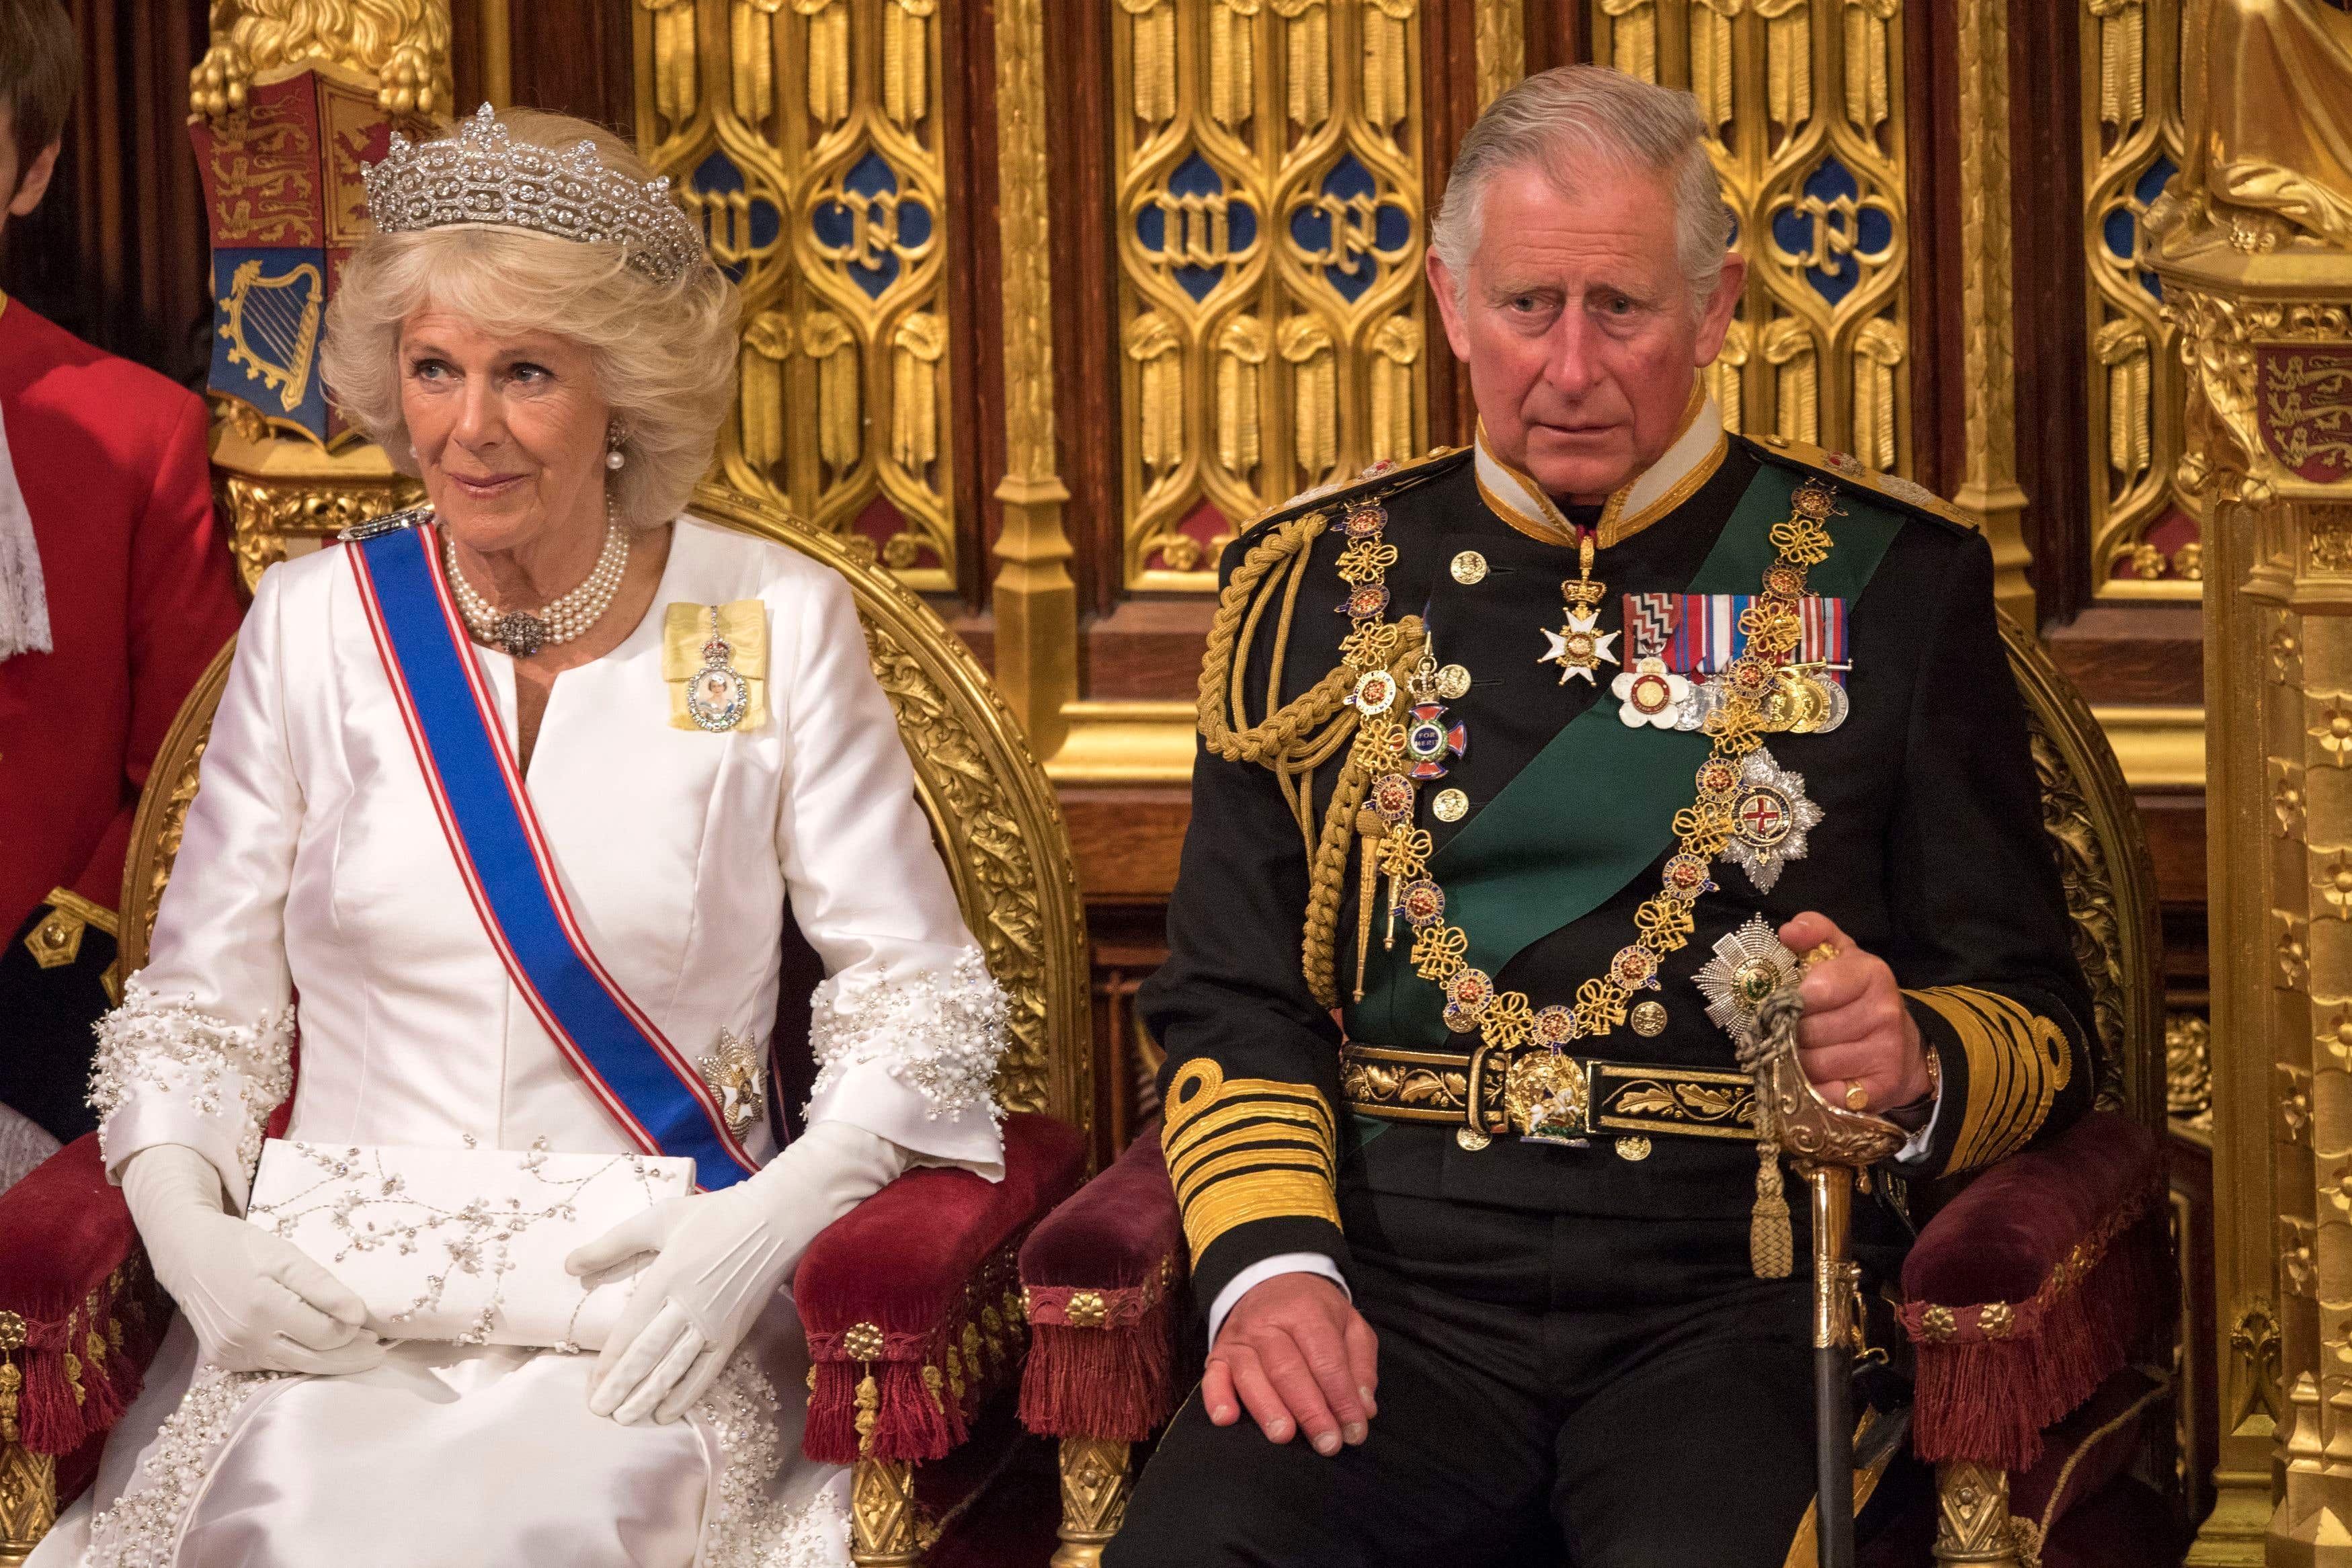 King’s coronation set for May 6 with Camilla to be crowned alongside